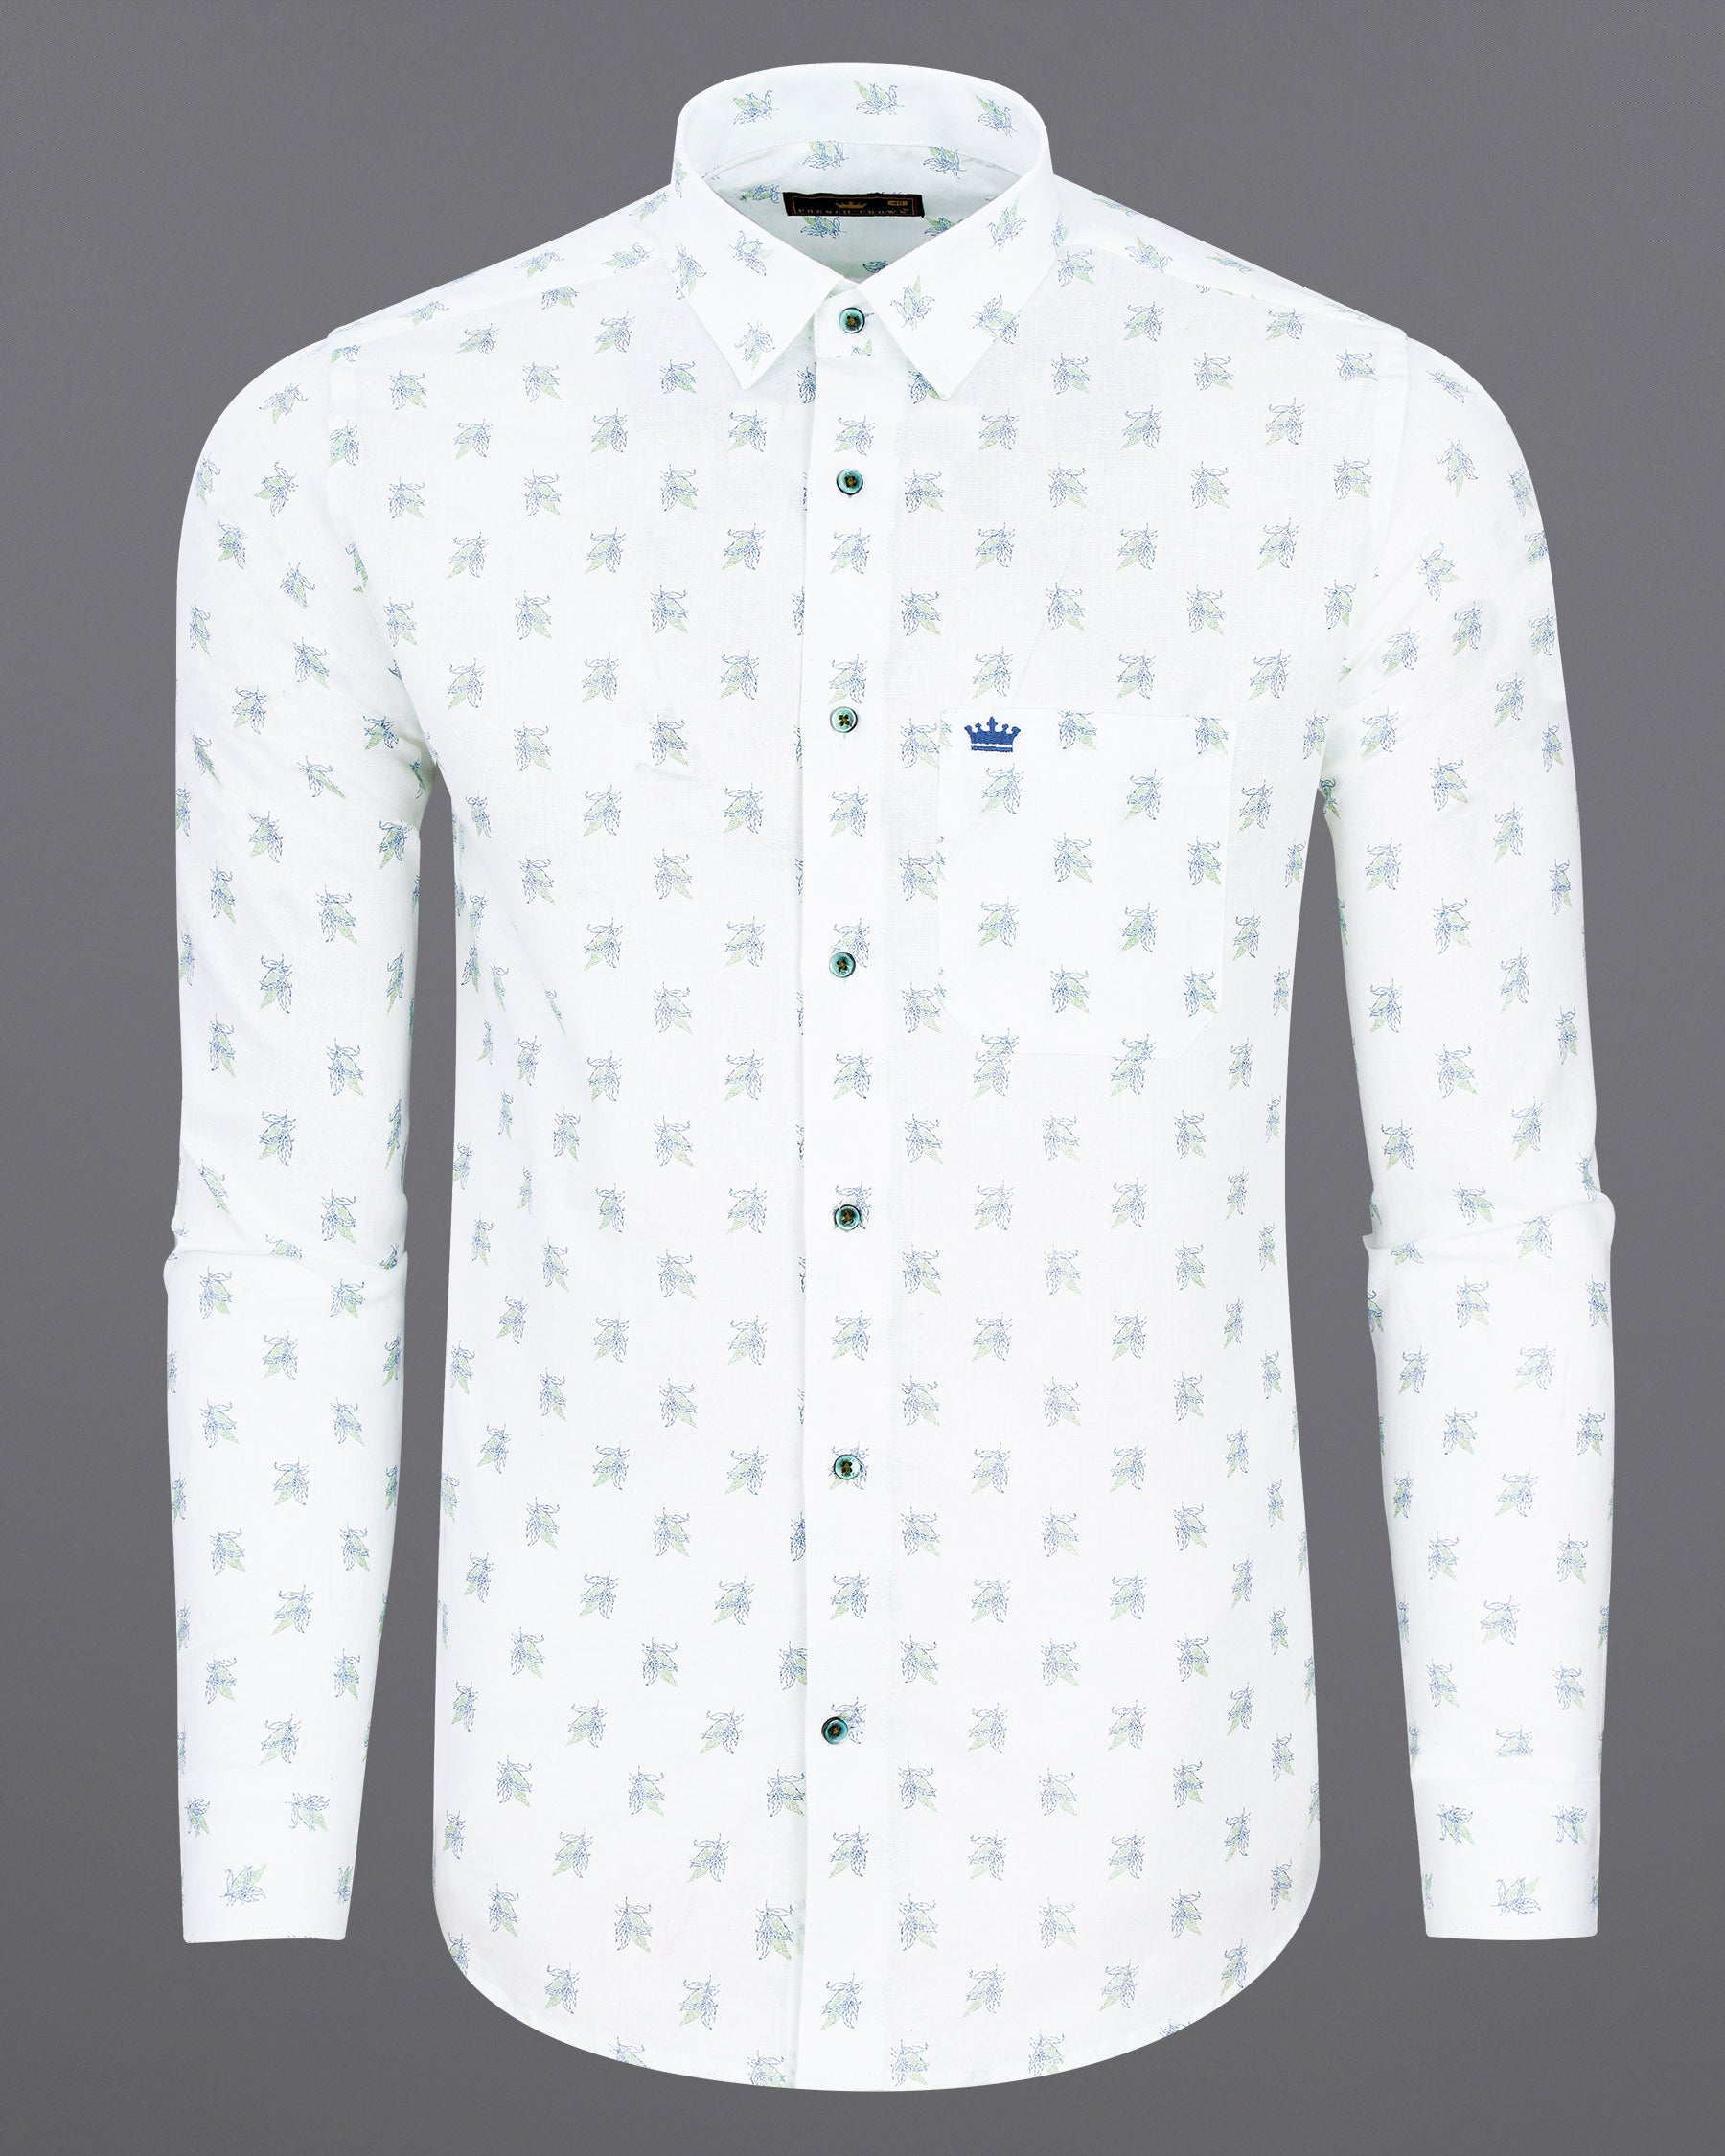 Bright White Floral Printed Luxurious Linen Shirt 7747-GR-38, 7747-GR-H-38, 7747-GR-39,7747-GR-H-39, 7747-GR-40, 7747-GR-H-40, 7747-GR-42, 7747-GR-H-42, 7747-GR-44, 7747-GR-H-44, 7747-GR-46, 7747-GR-H-46, 7747-GR-48, 7747-GR-H-48, 7747-GR-50, 7747-GR-H-50, 7747-GR-52, 7747-GR-H-52